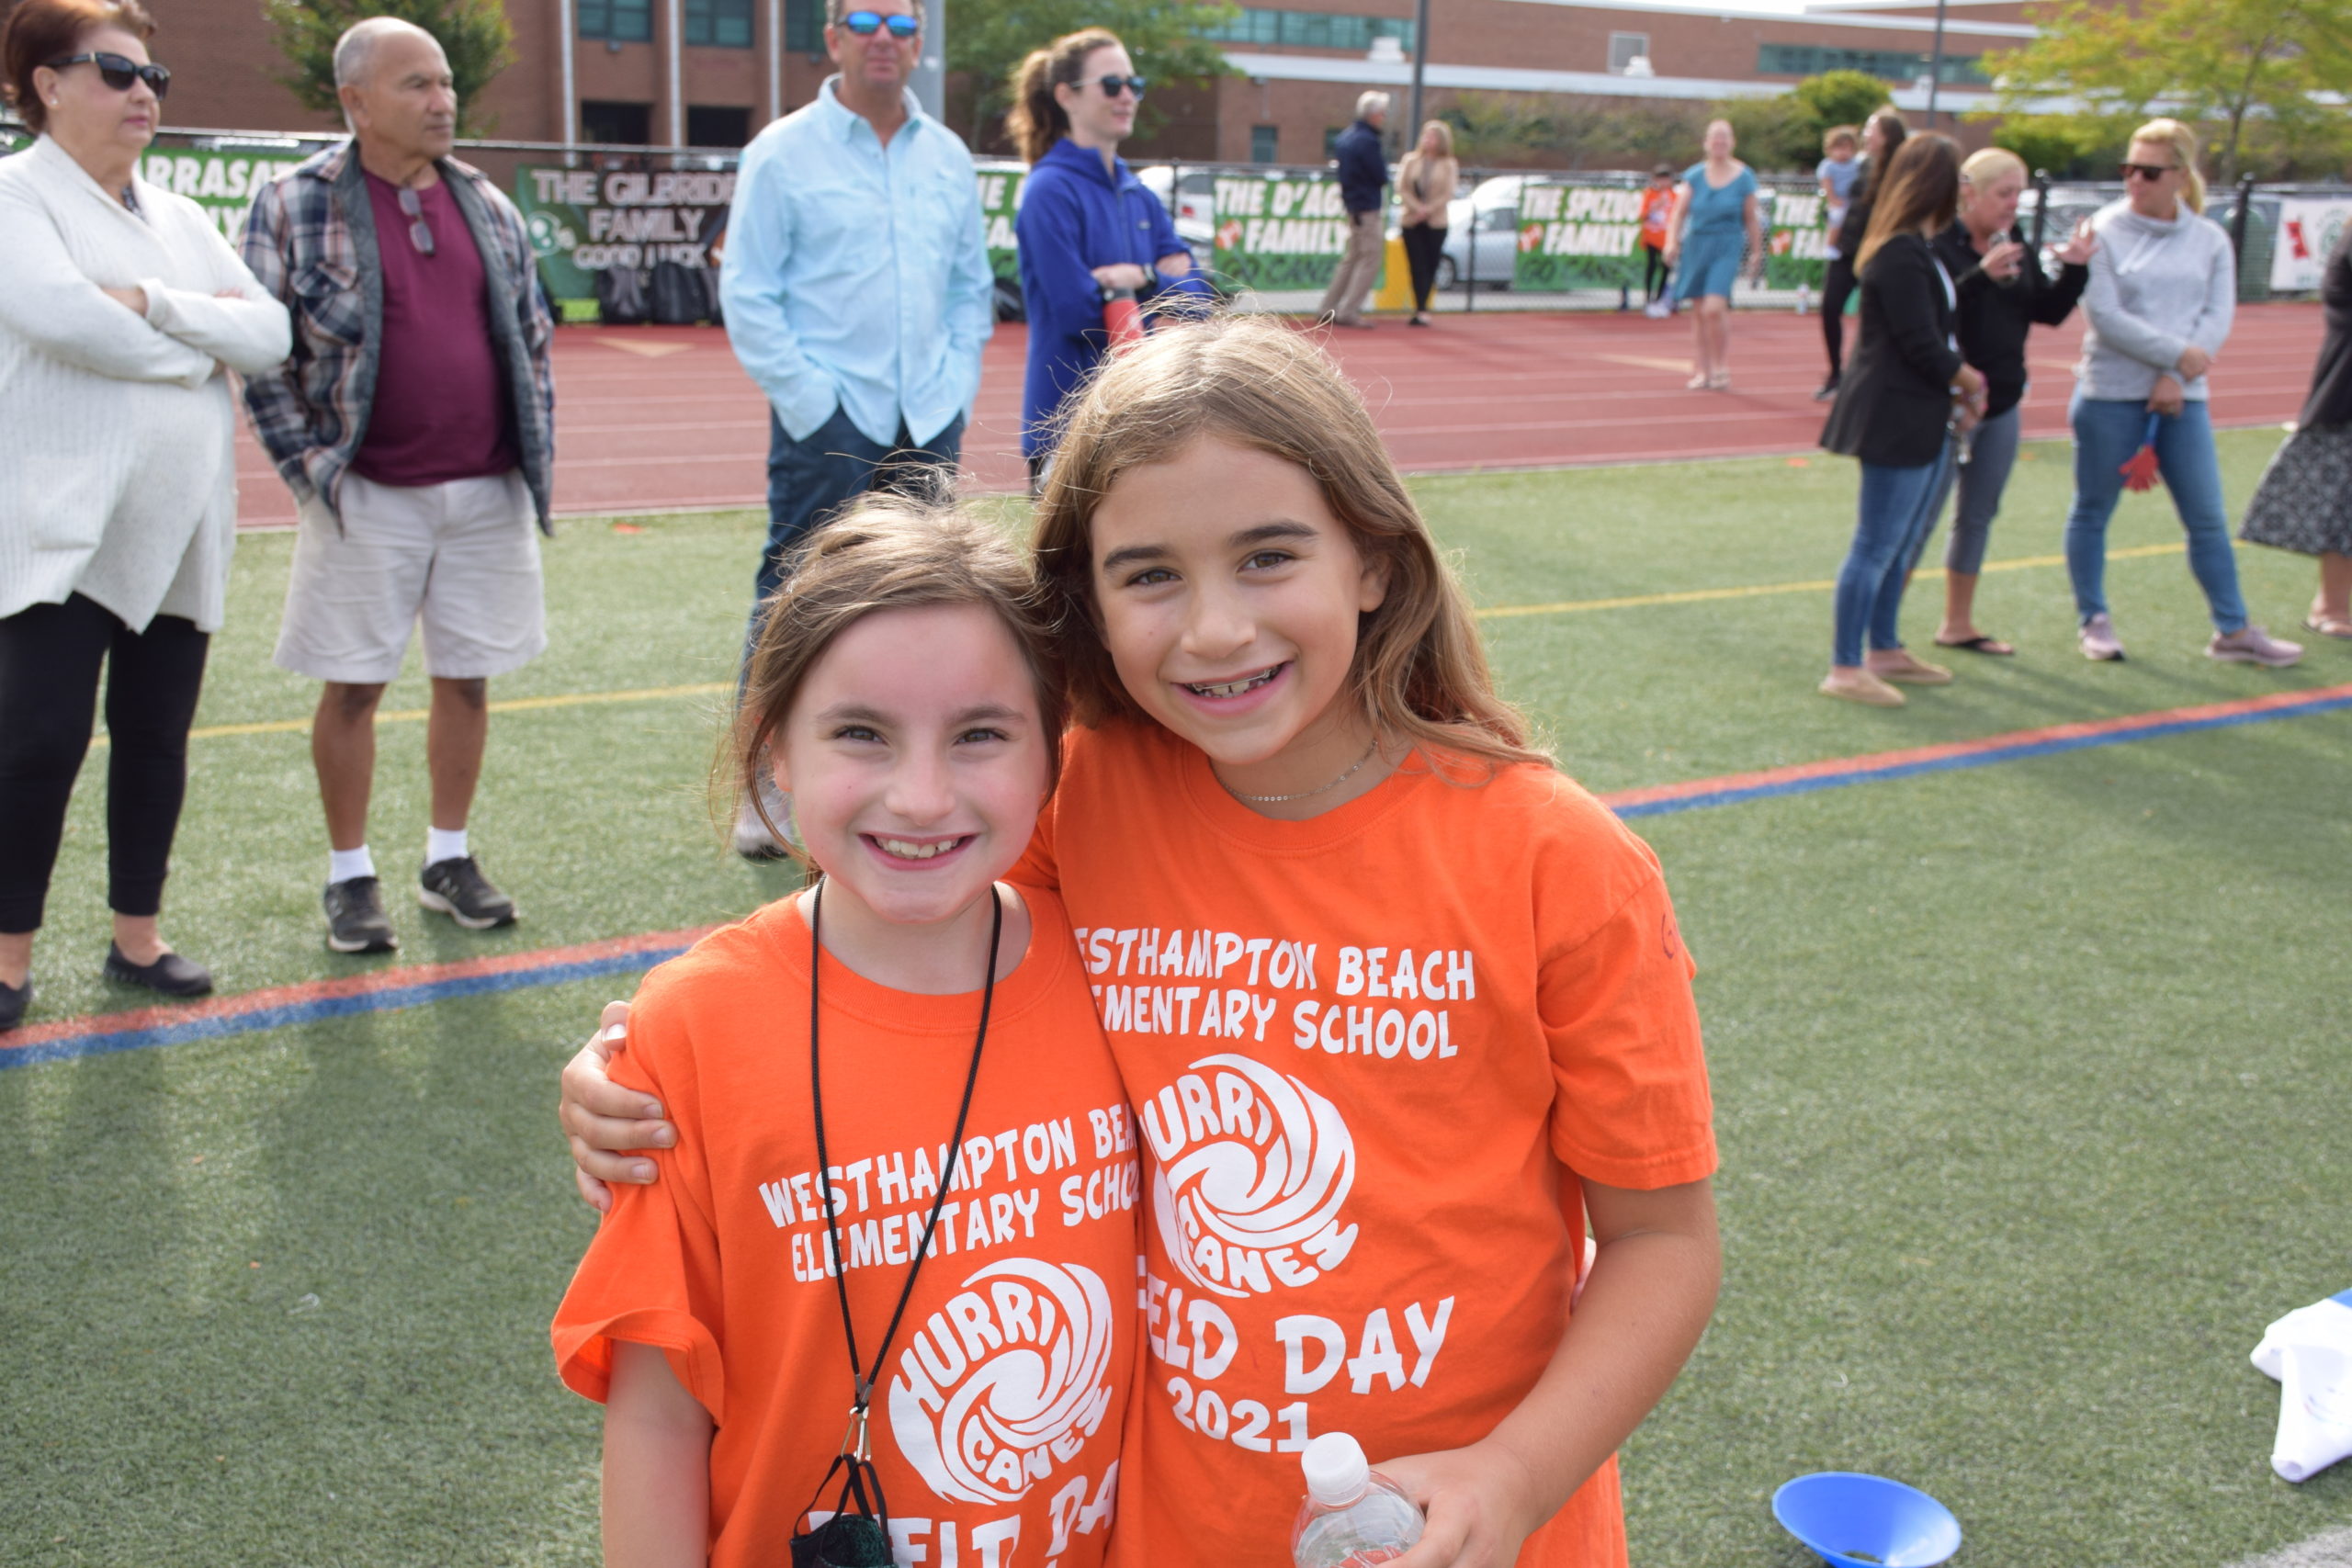 Westhampton Beach Elementary School students raised funds for school programs by participating in the annual Hurricane Fun Run on September 27.